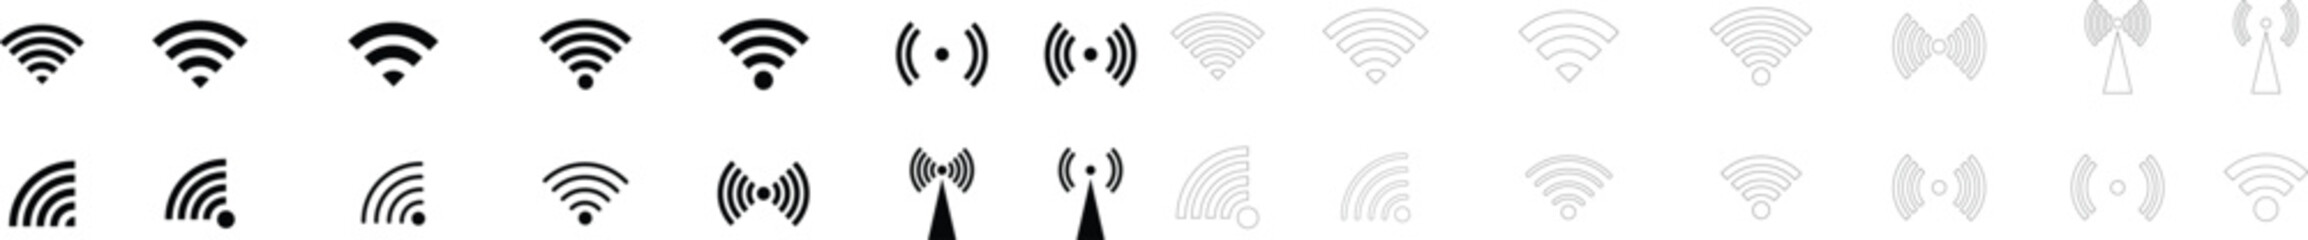 WiFi wireless internet signal line flat icon symbol set. Connect of network collection. Bar of satellites for mobile, radio, computer. Hotpot, strength electronic wave from antenna for communication.